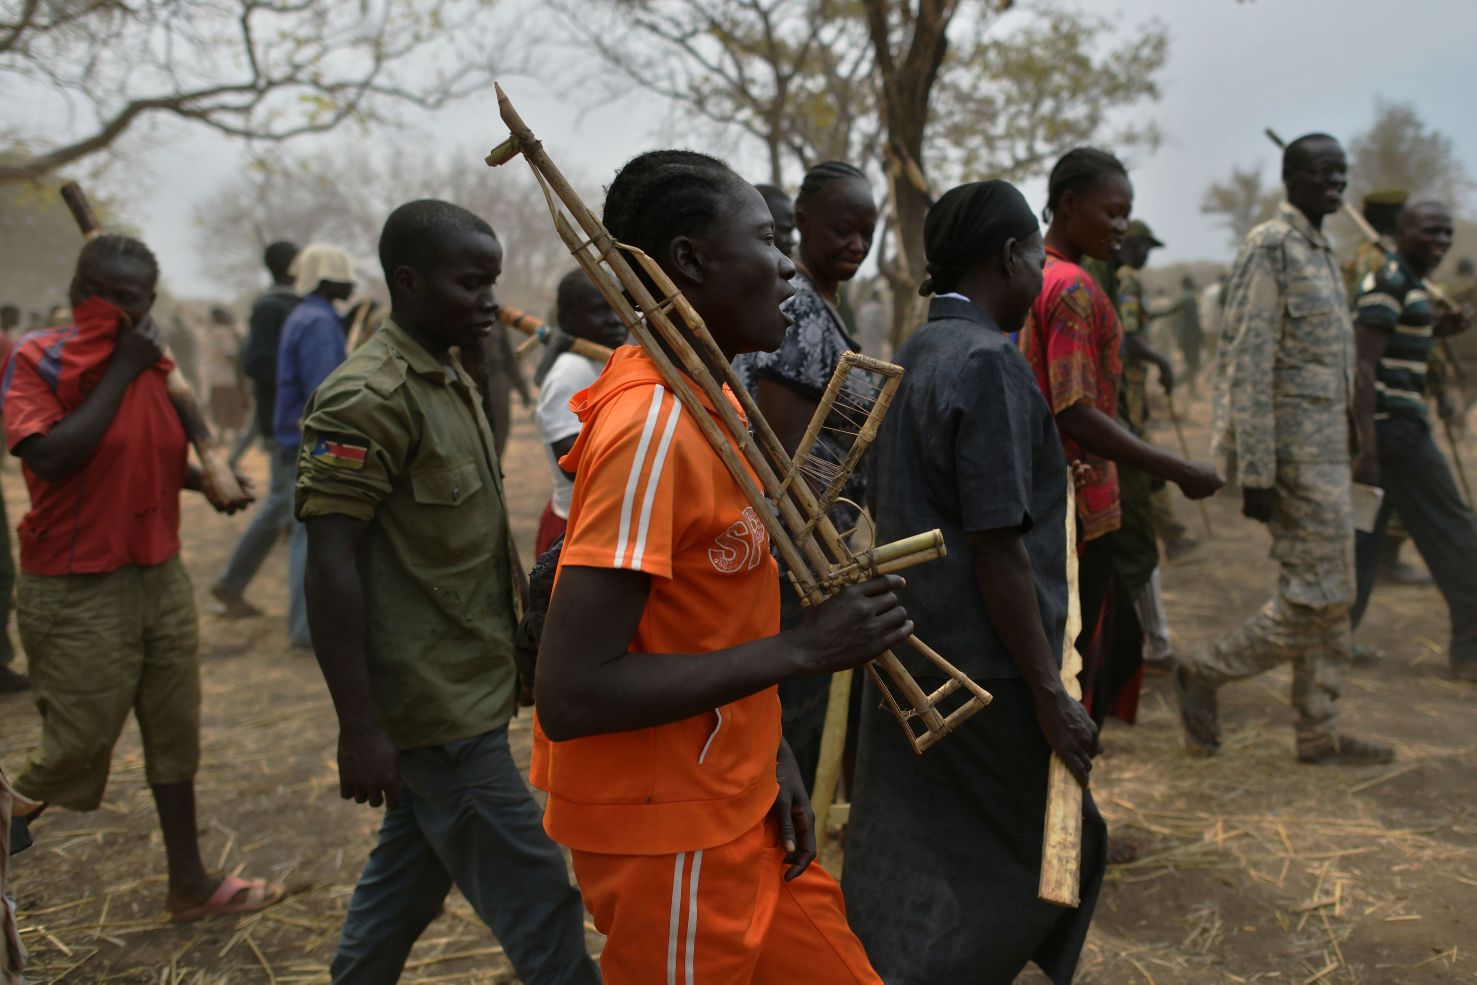 Analysis The South Sudanese armed forces' struggle for unity